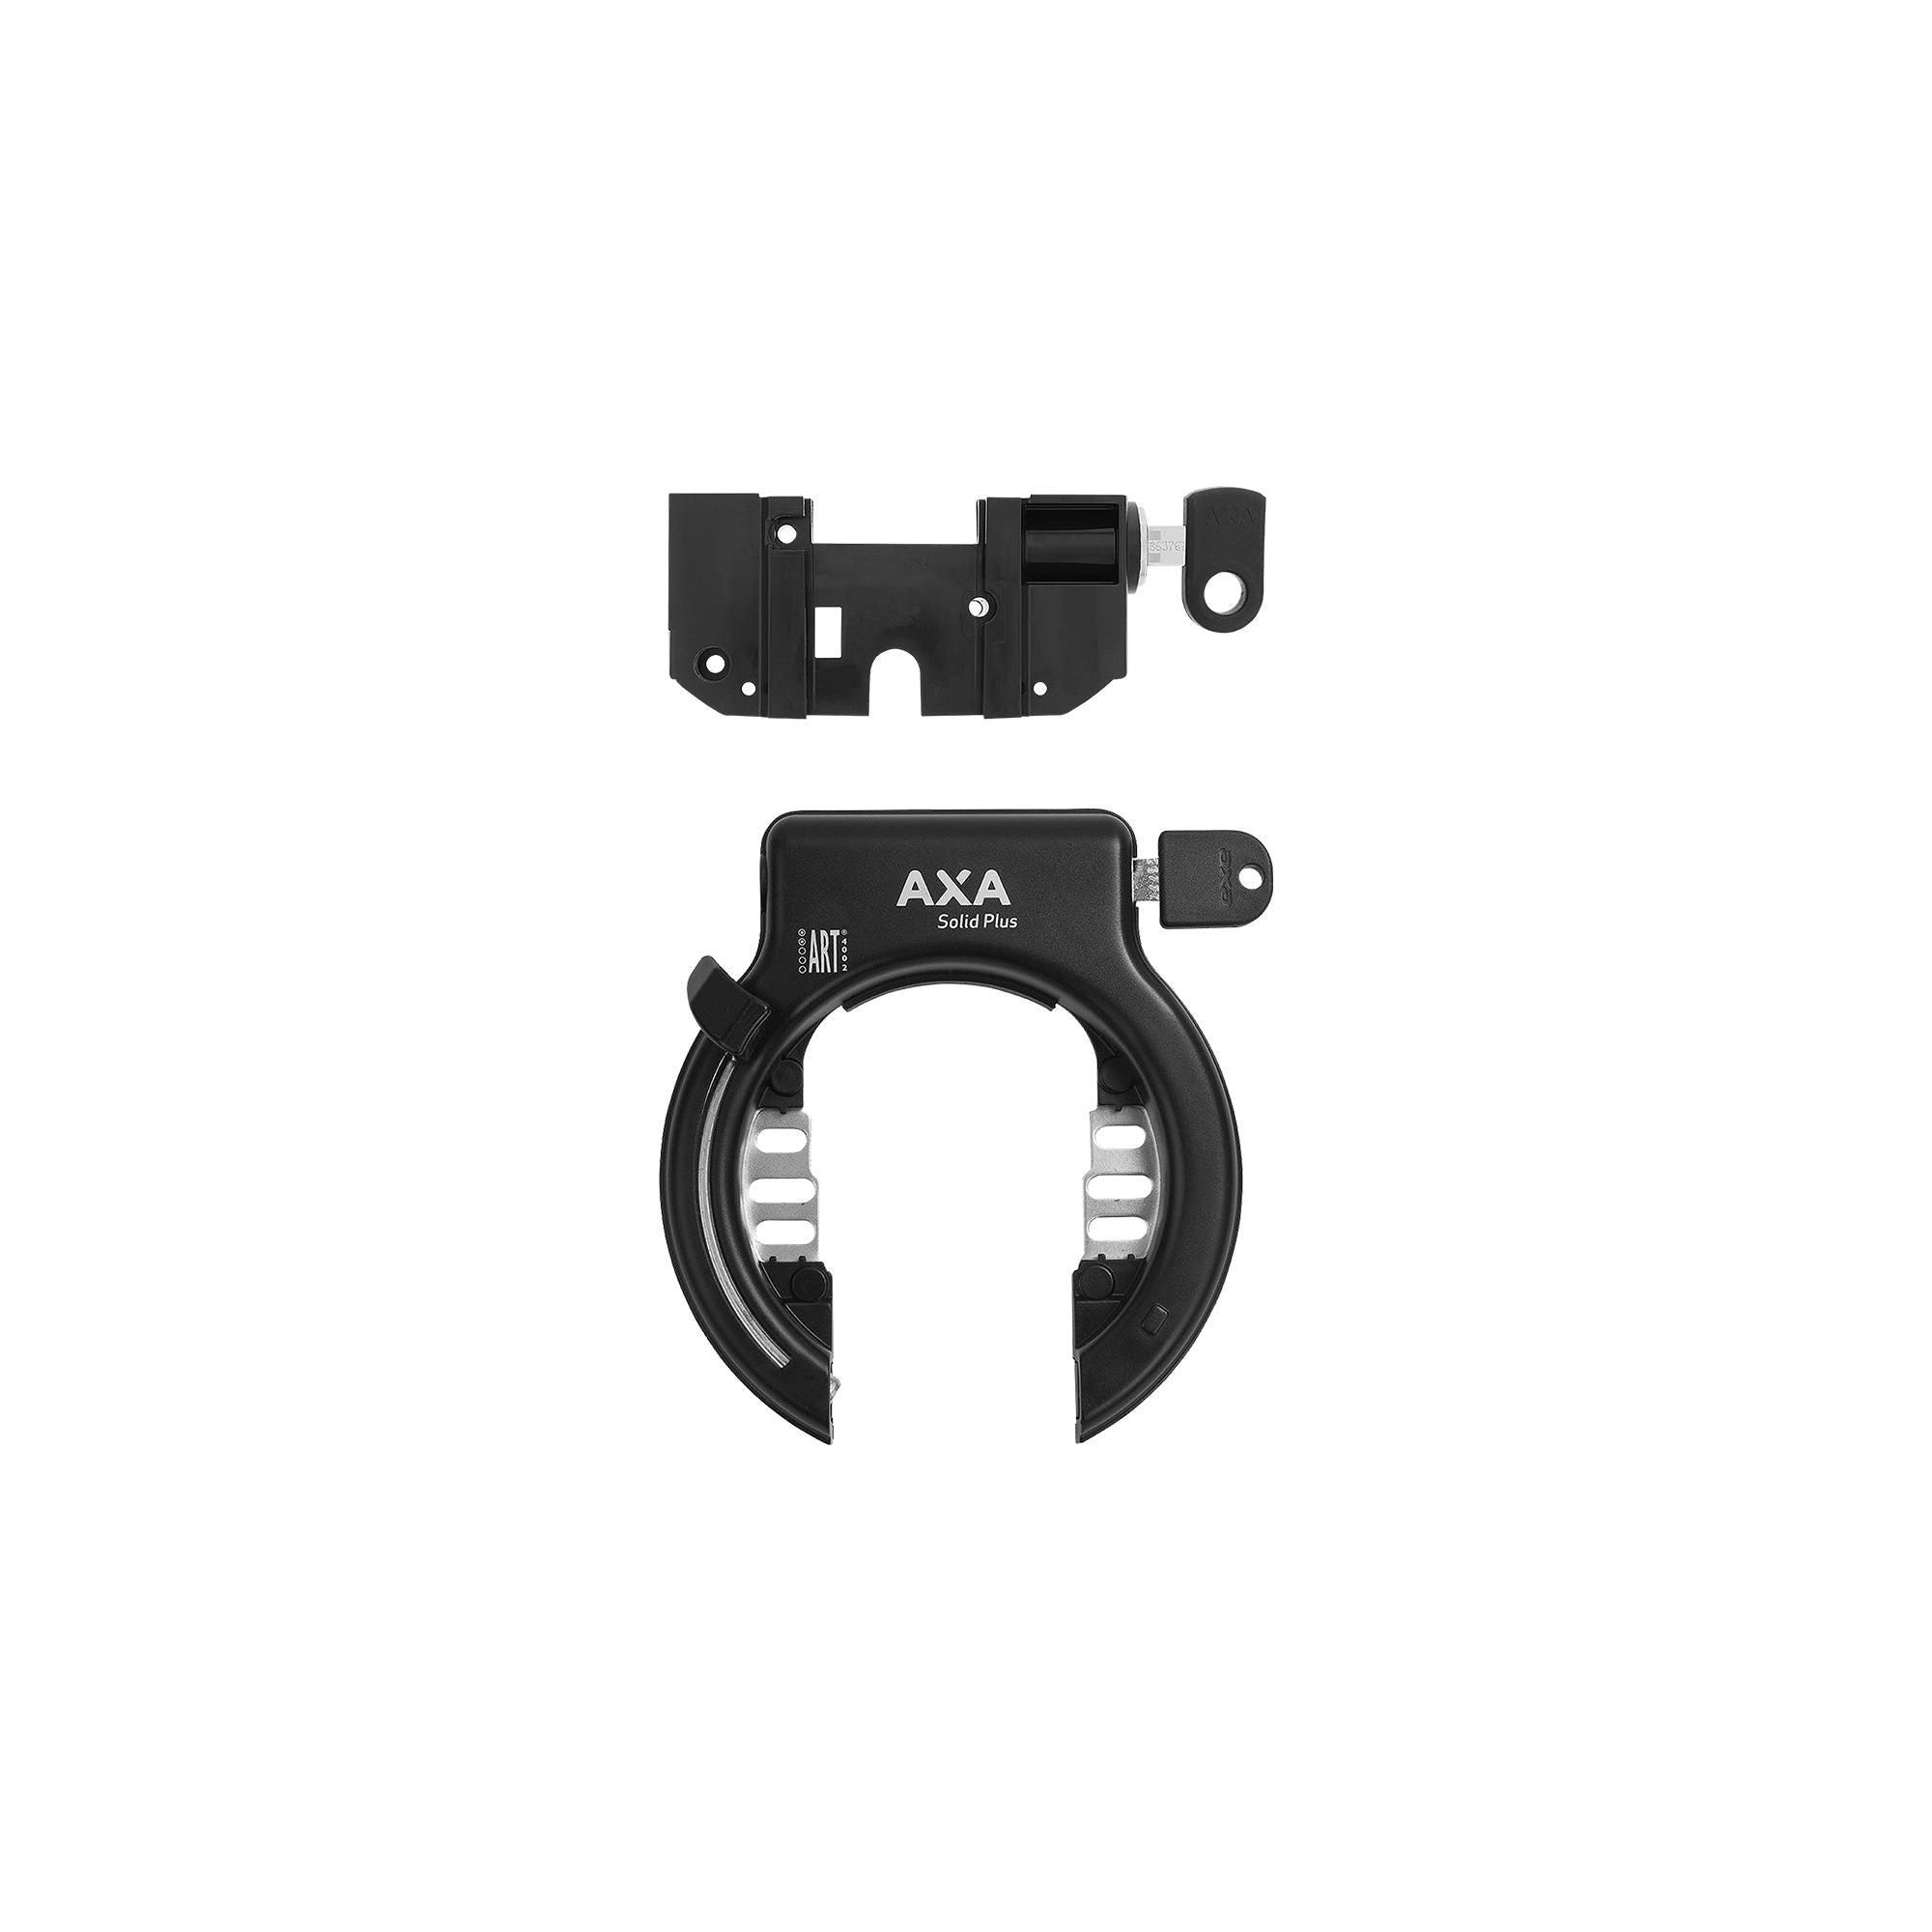 AXA Bosch 2 Rack Battery with Solid-Plus Ring Lock